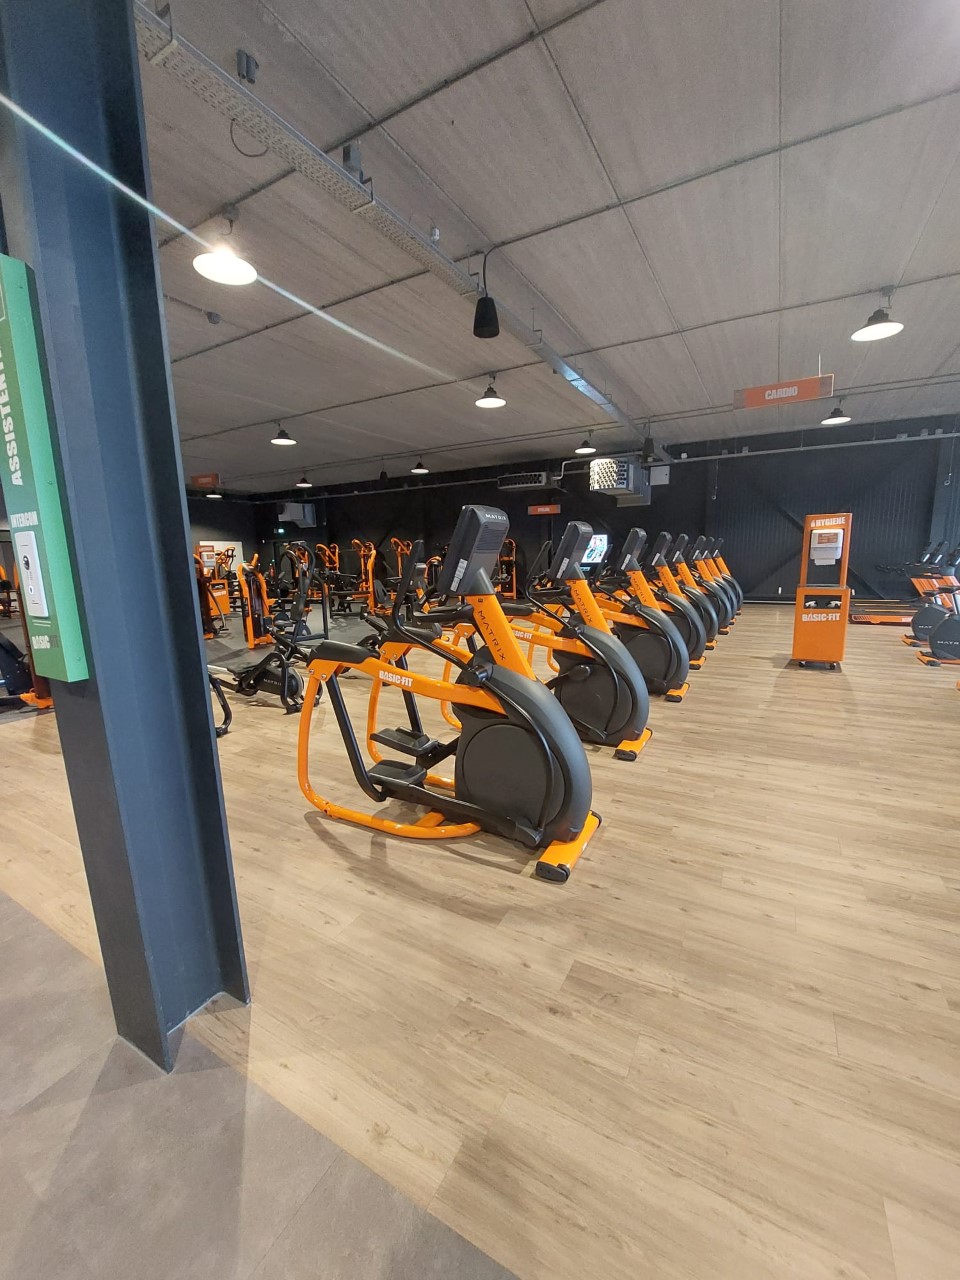 Foto's Basic-Fit Cuijk Spinding 24/7